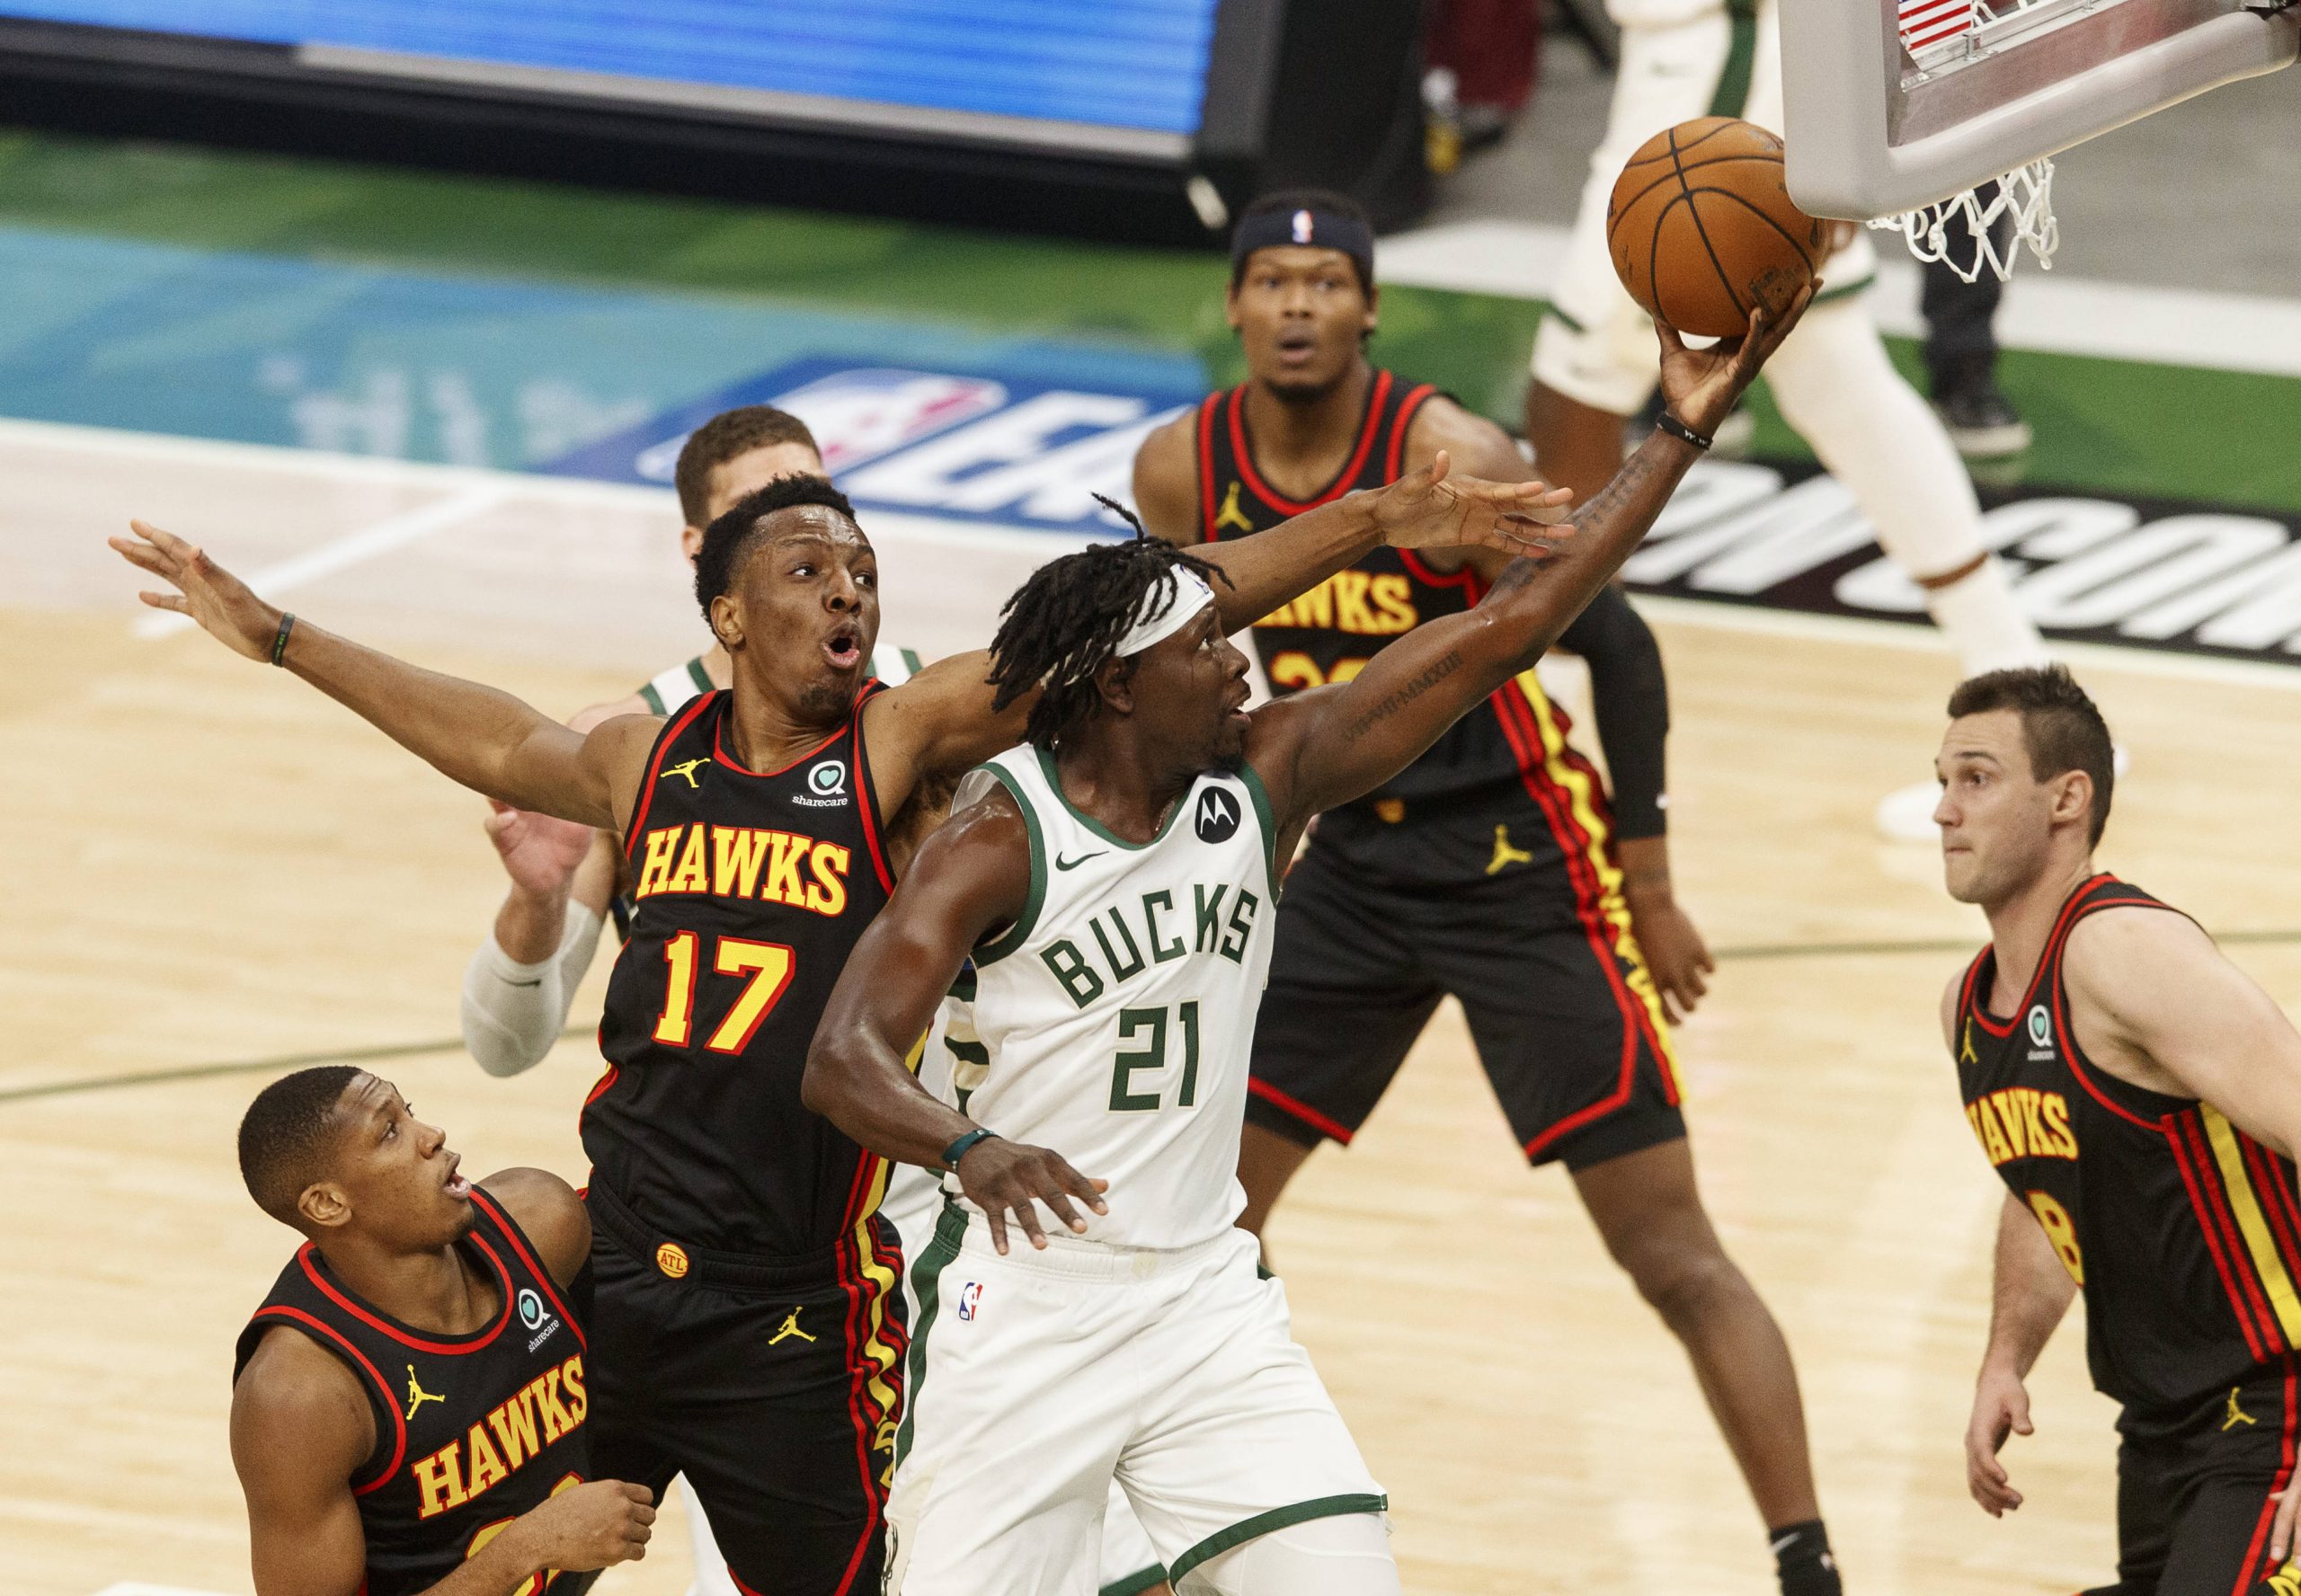 Milwaukee Bucks guard Jrue Holiday (21) shoots in front of Atlanta Hawks center Onyeka Okongwu (17) during the first quarter during game five of the Eastern Conference Finals for the 2021 NBA Playoffs at Fiserv Forum.